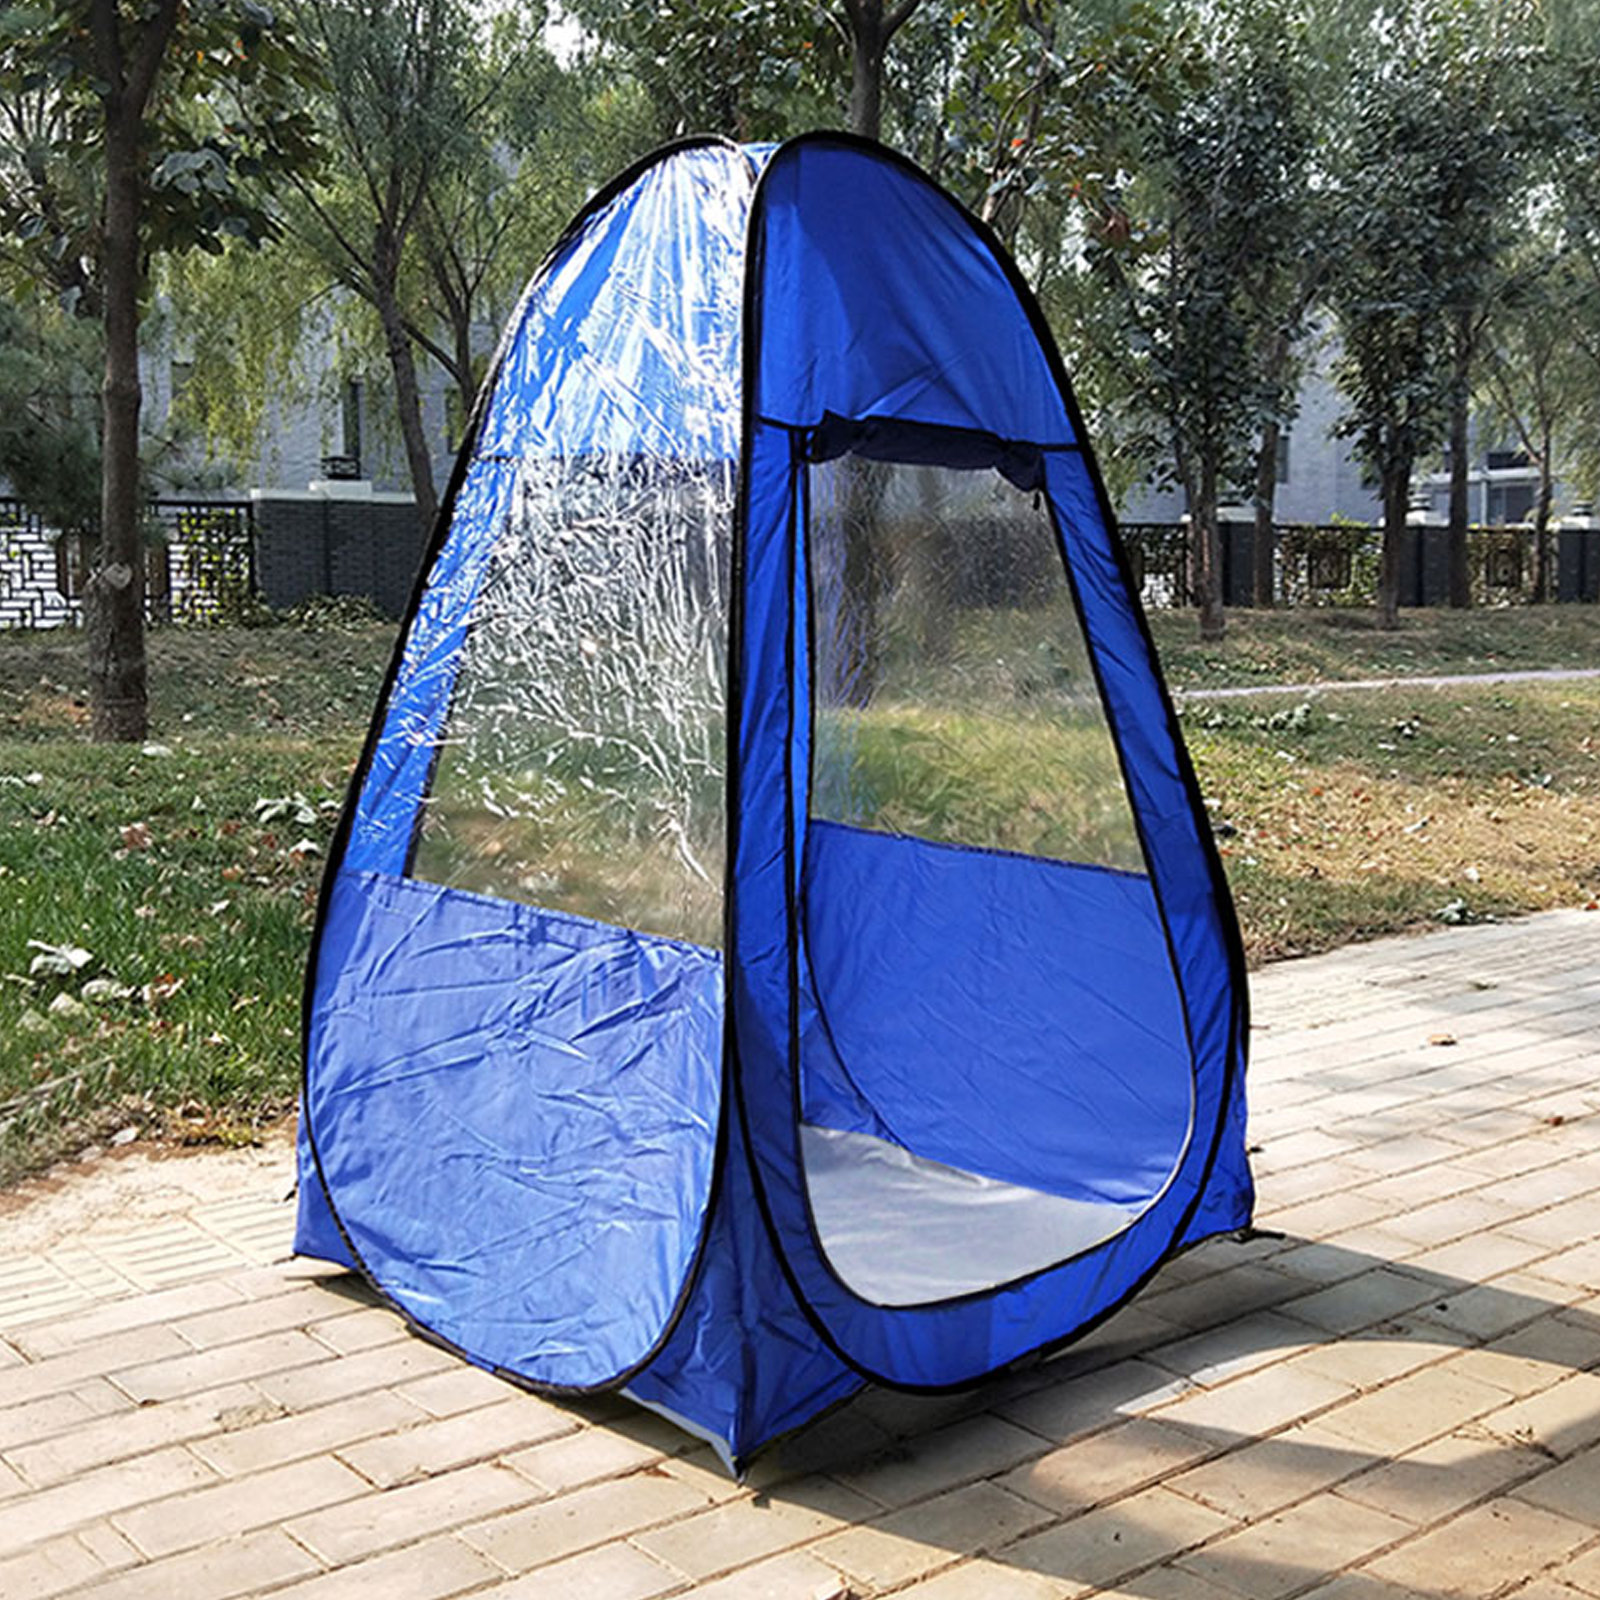 personal weather pop up tent